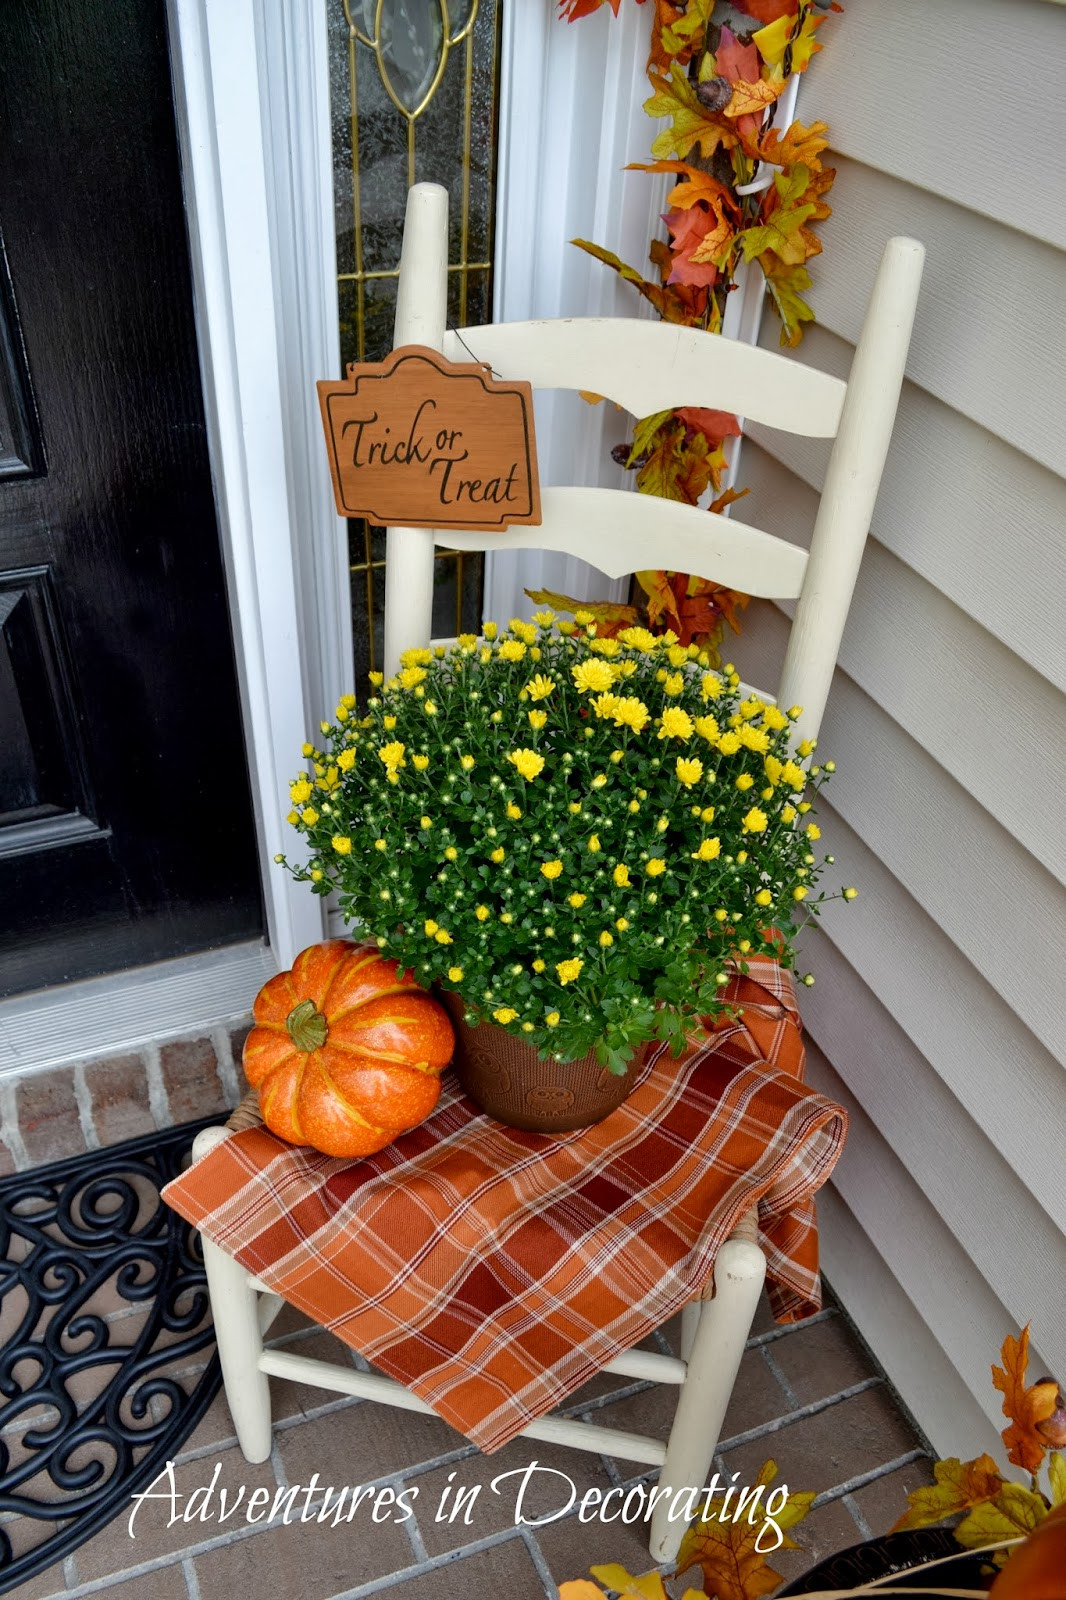 Fall Decorating Front Porch
 Adventures in Decorating Our Fall Front Porch